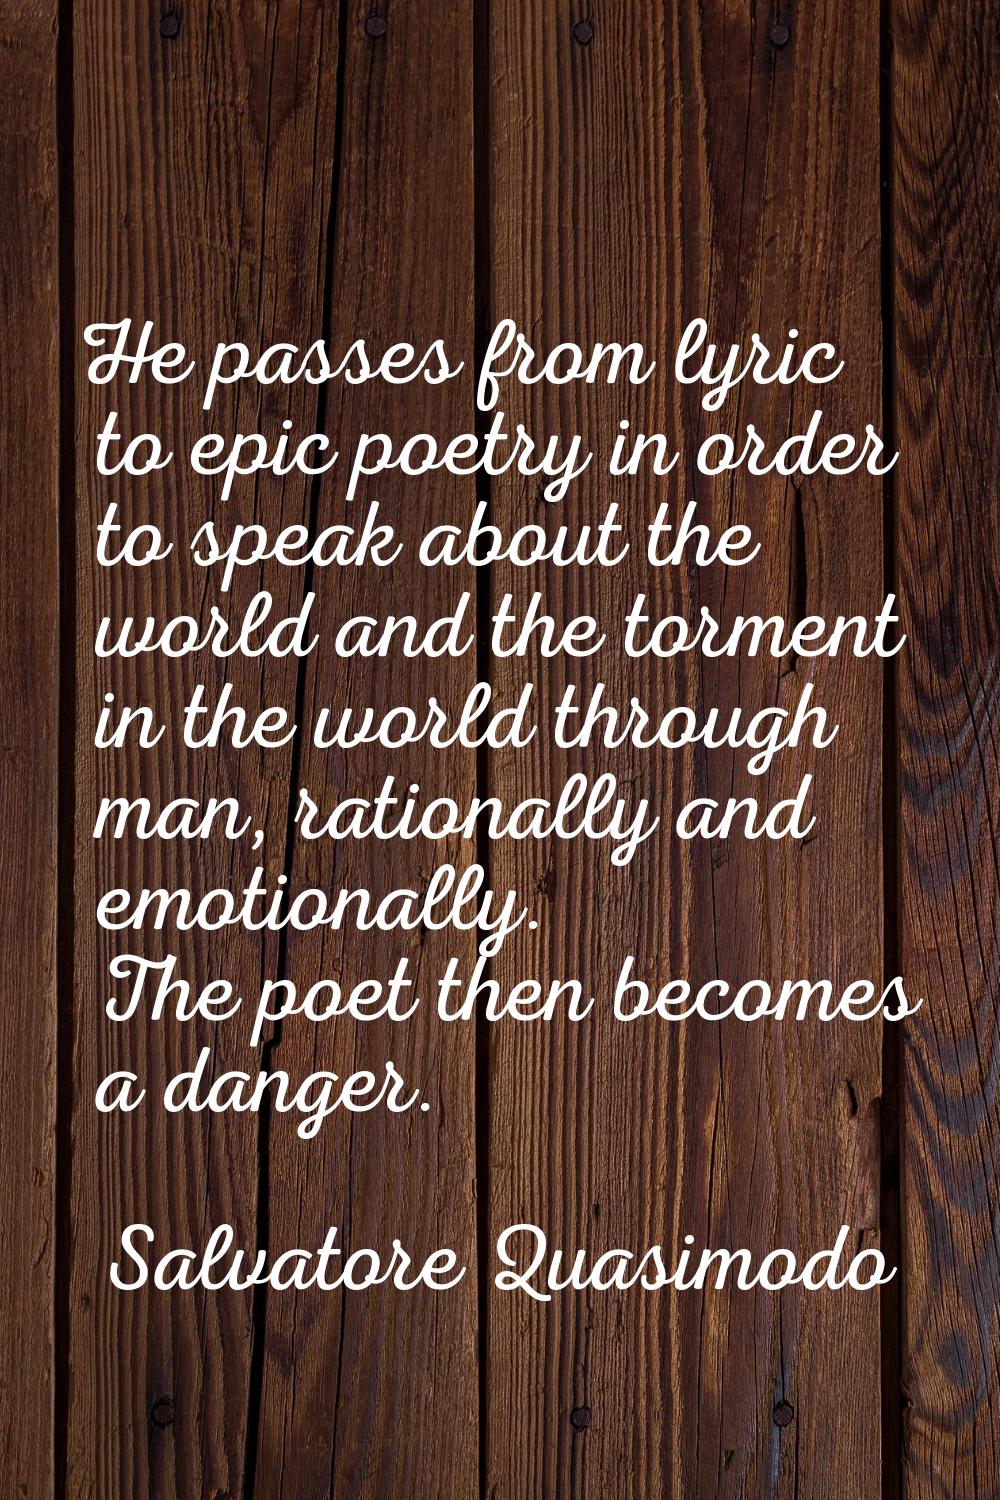 He passes from lyric to epic poetry in order to speak about the world and the torment in the world 